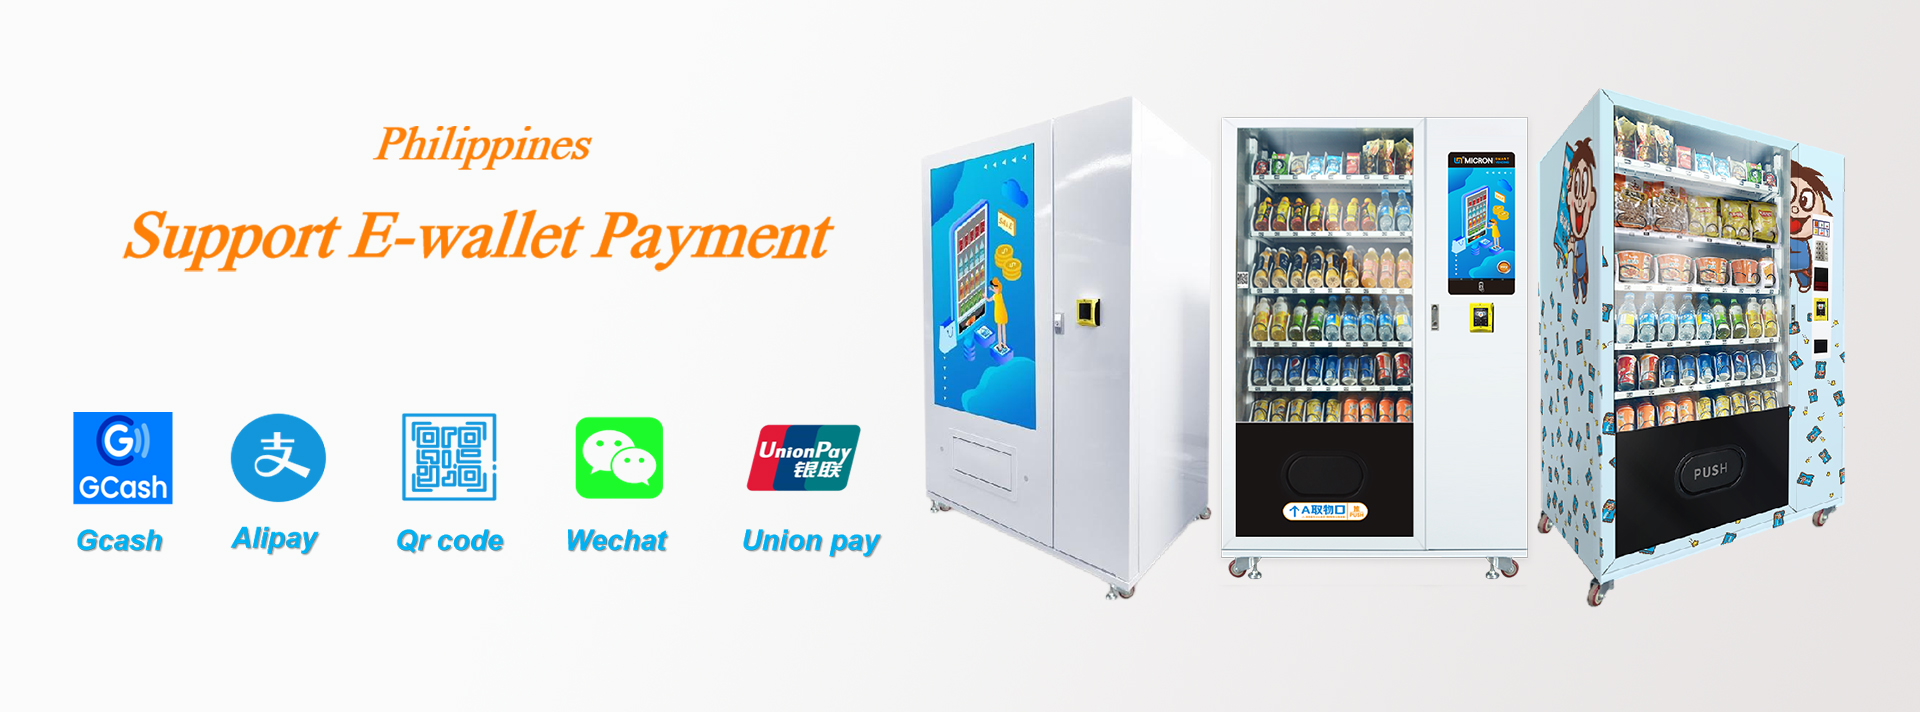 Micron vending machine supports optional payments